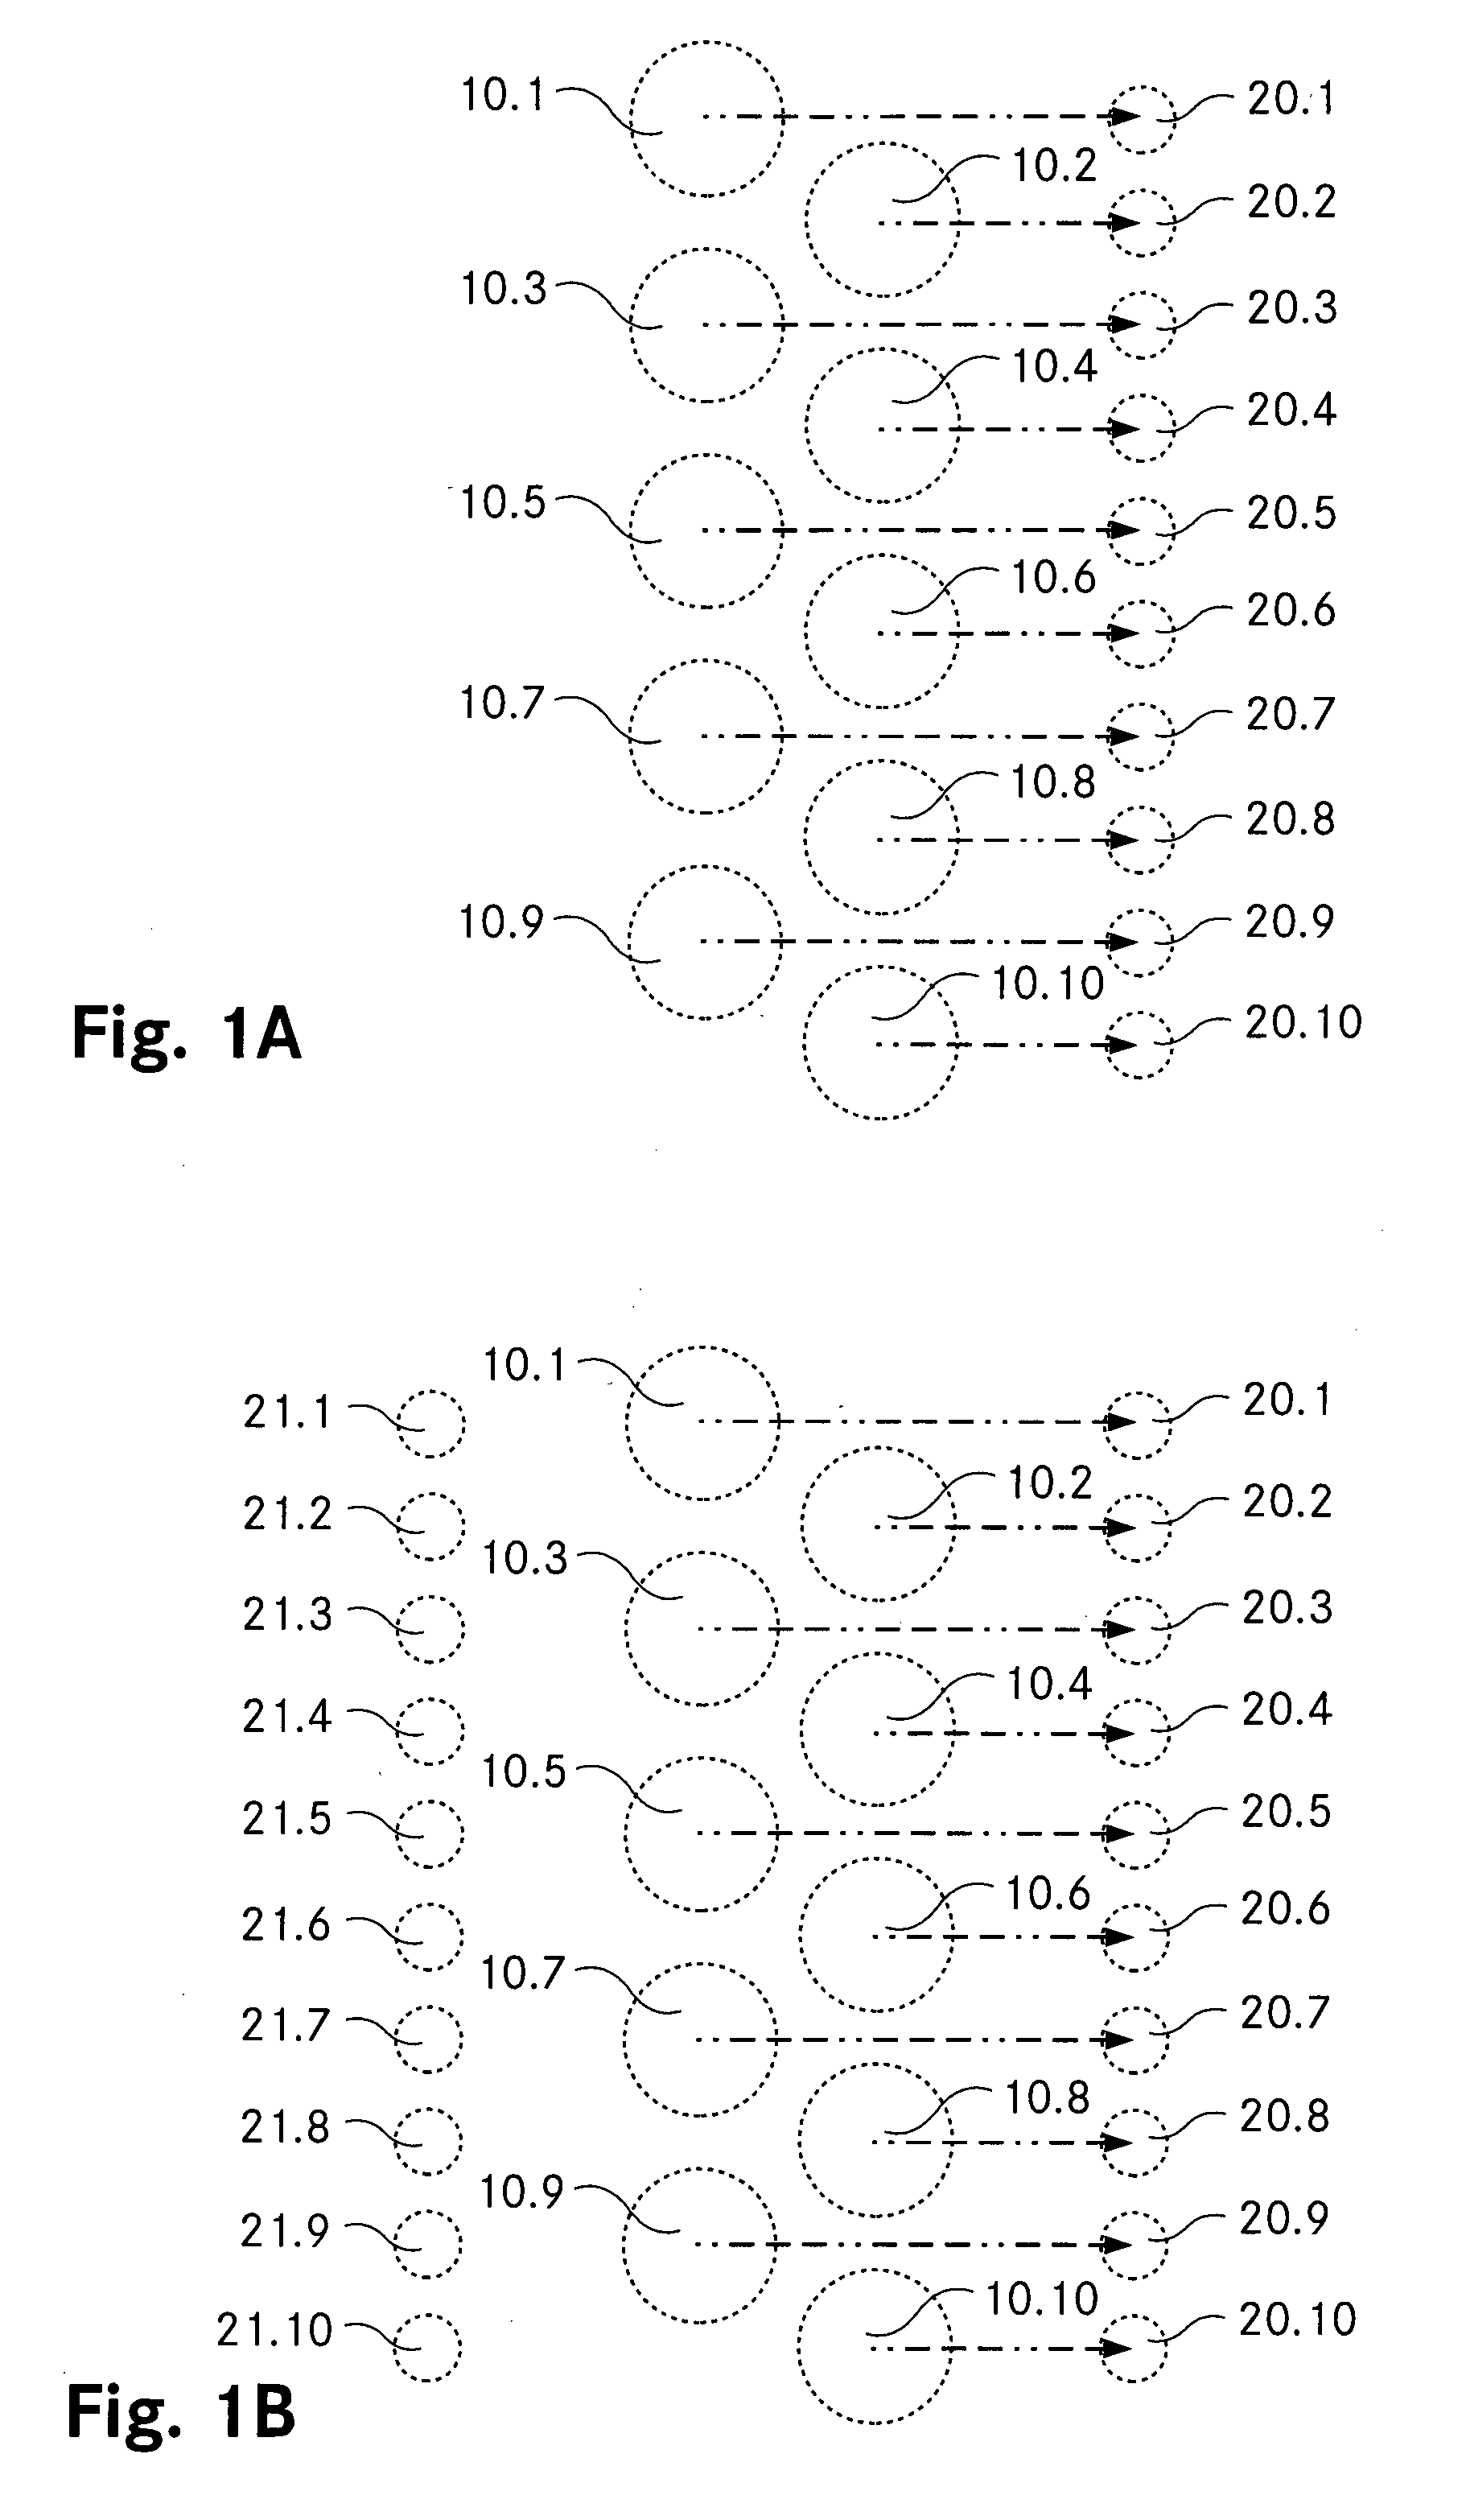 Apparatus and method for manufacturing filters and inserting the filters into single dose capsules for preparing beverages